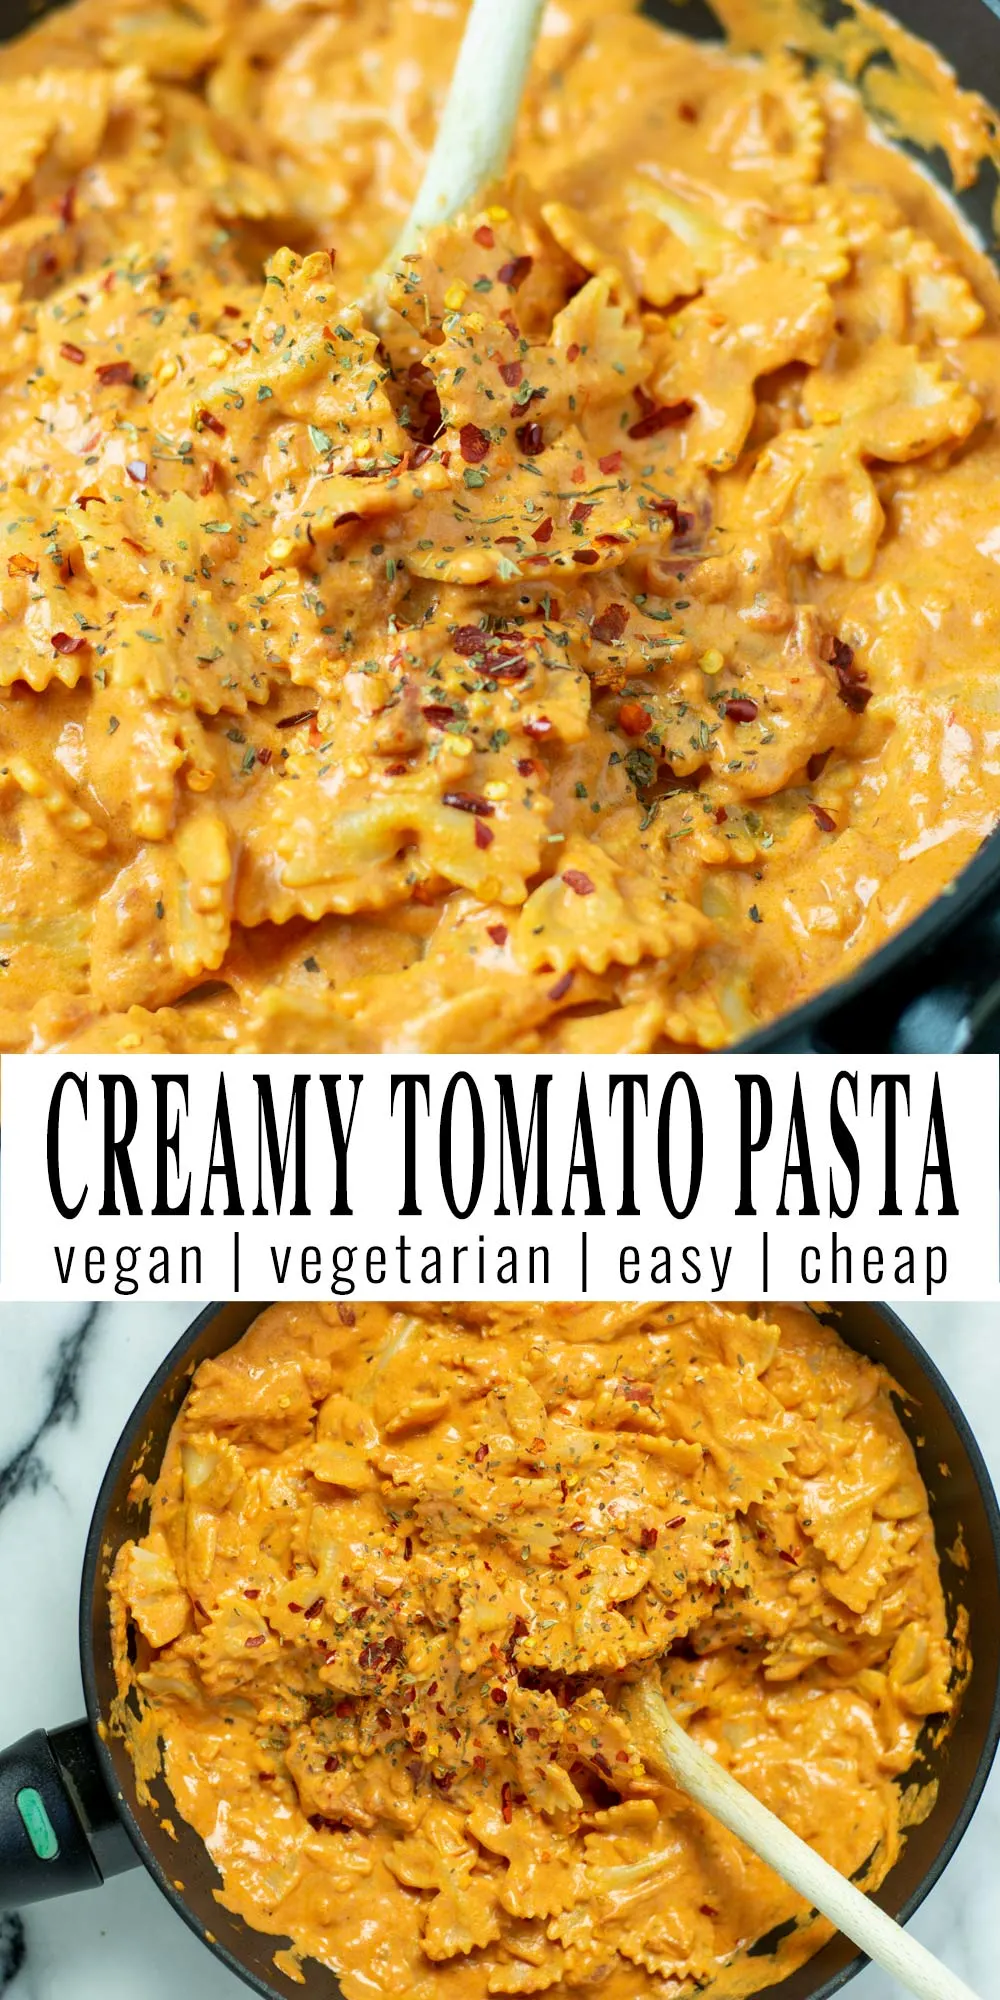 Collage of two pictures of the Creamy Tomato Pasta with recipe title text.